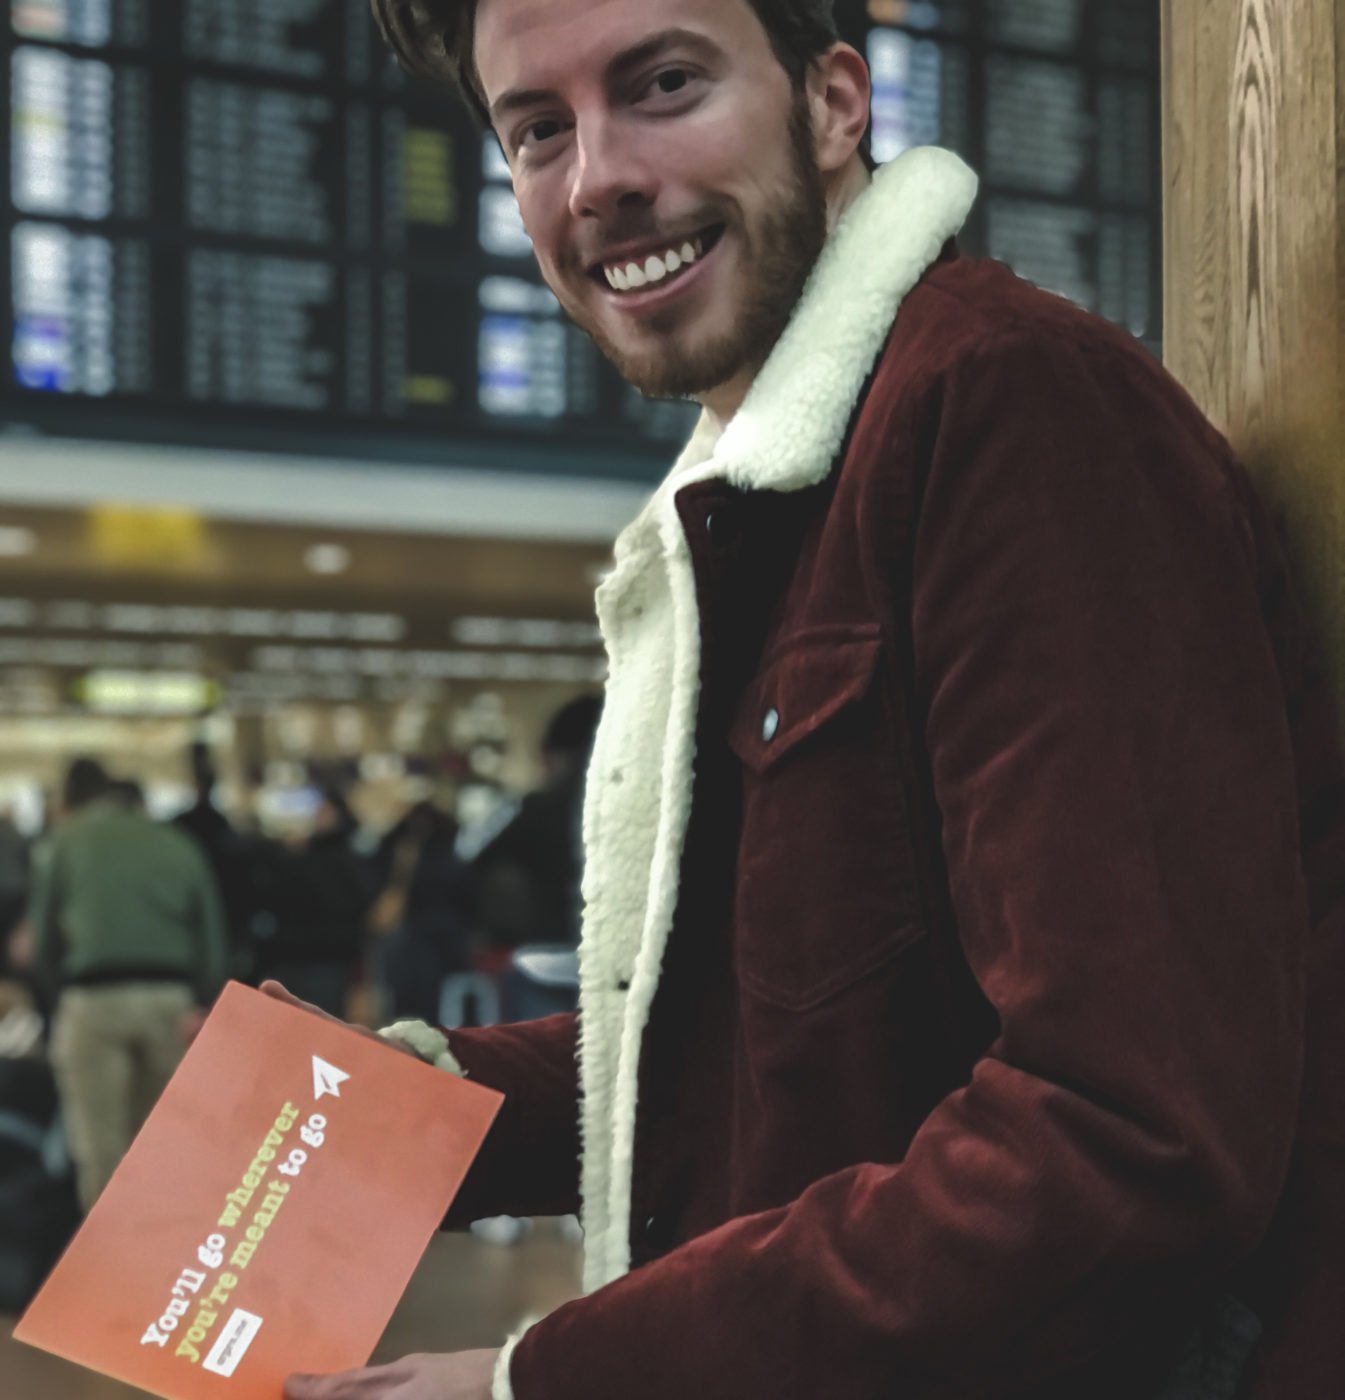 reveal where you're going with srprs.me at the airport!